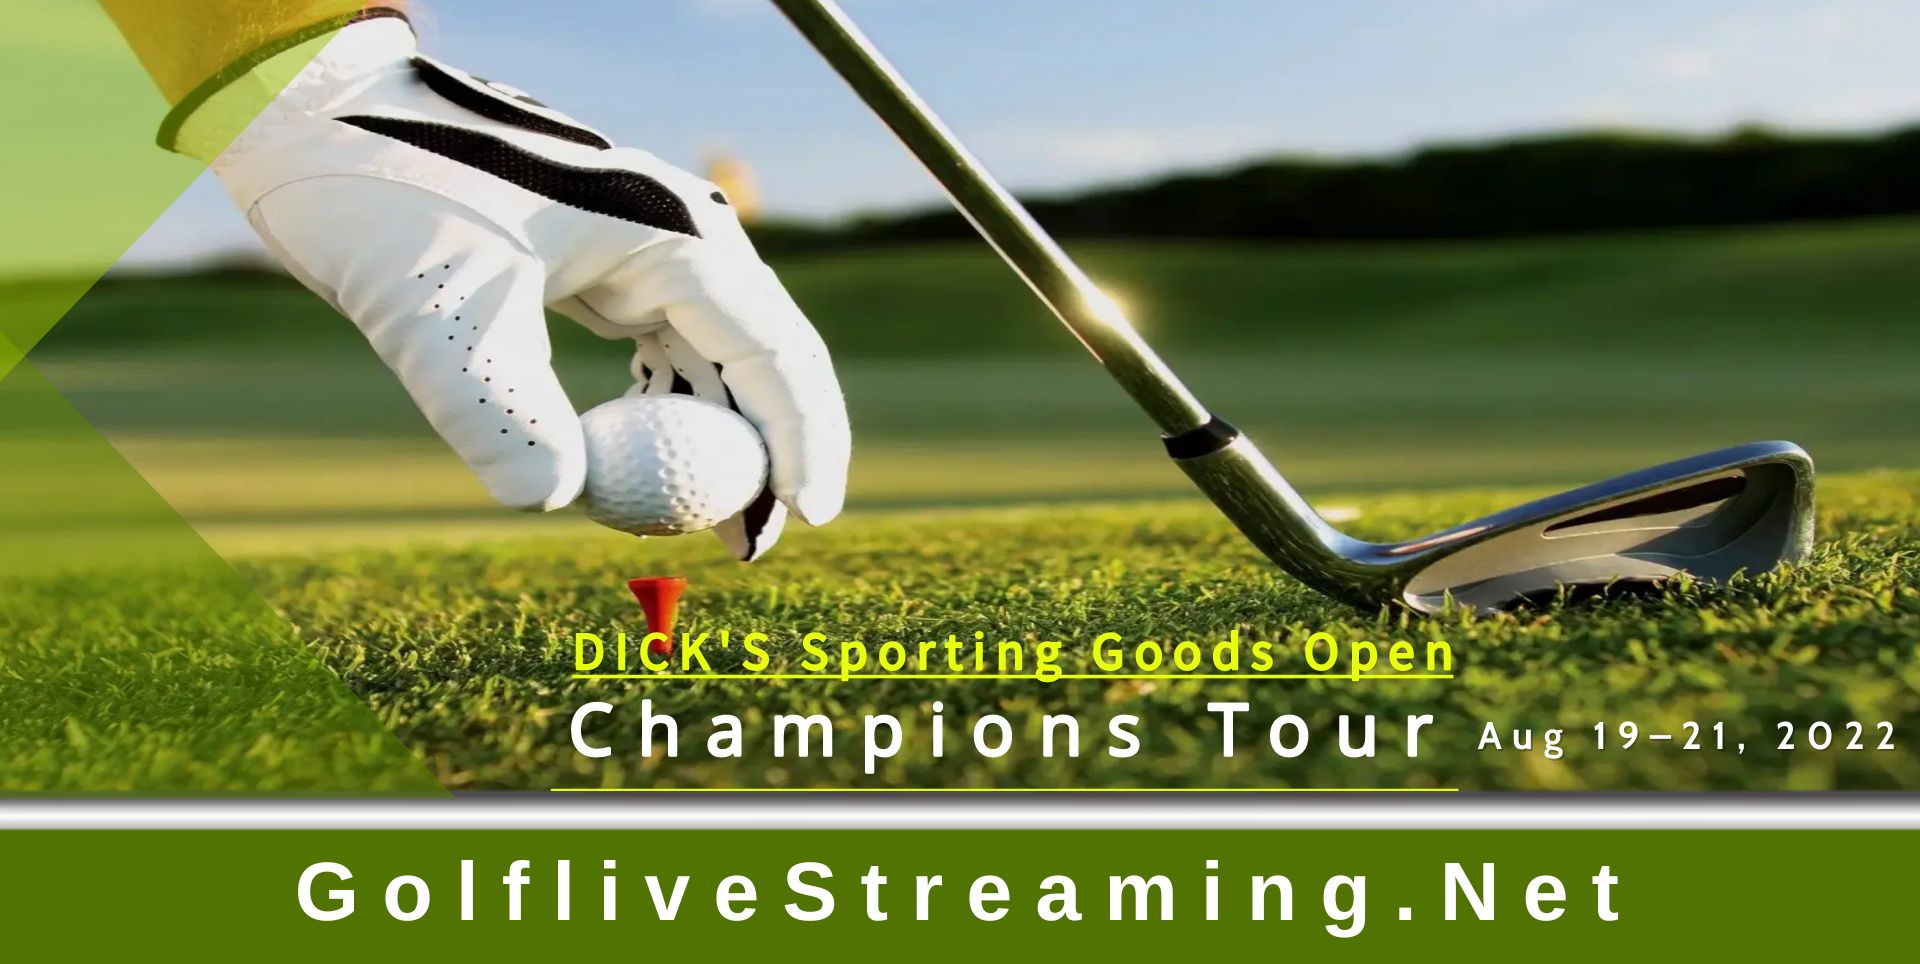 Dicks Sporting Goods Open Rd 2 Live 2022 | Champions Tour